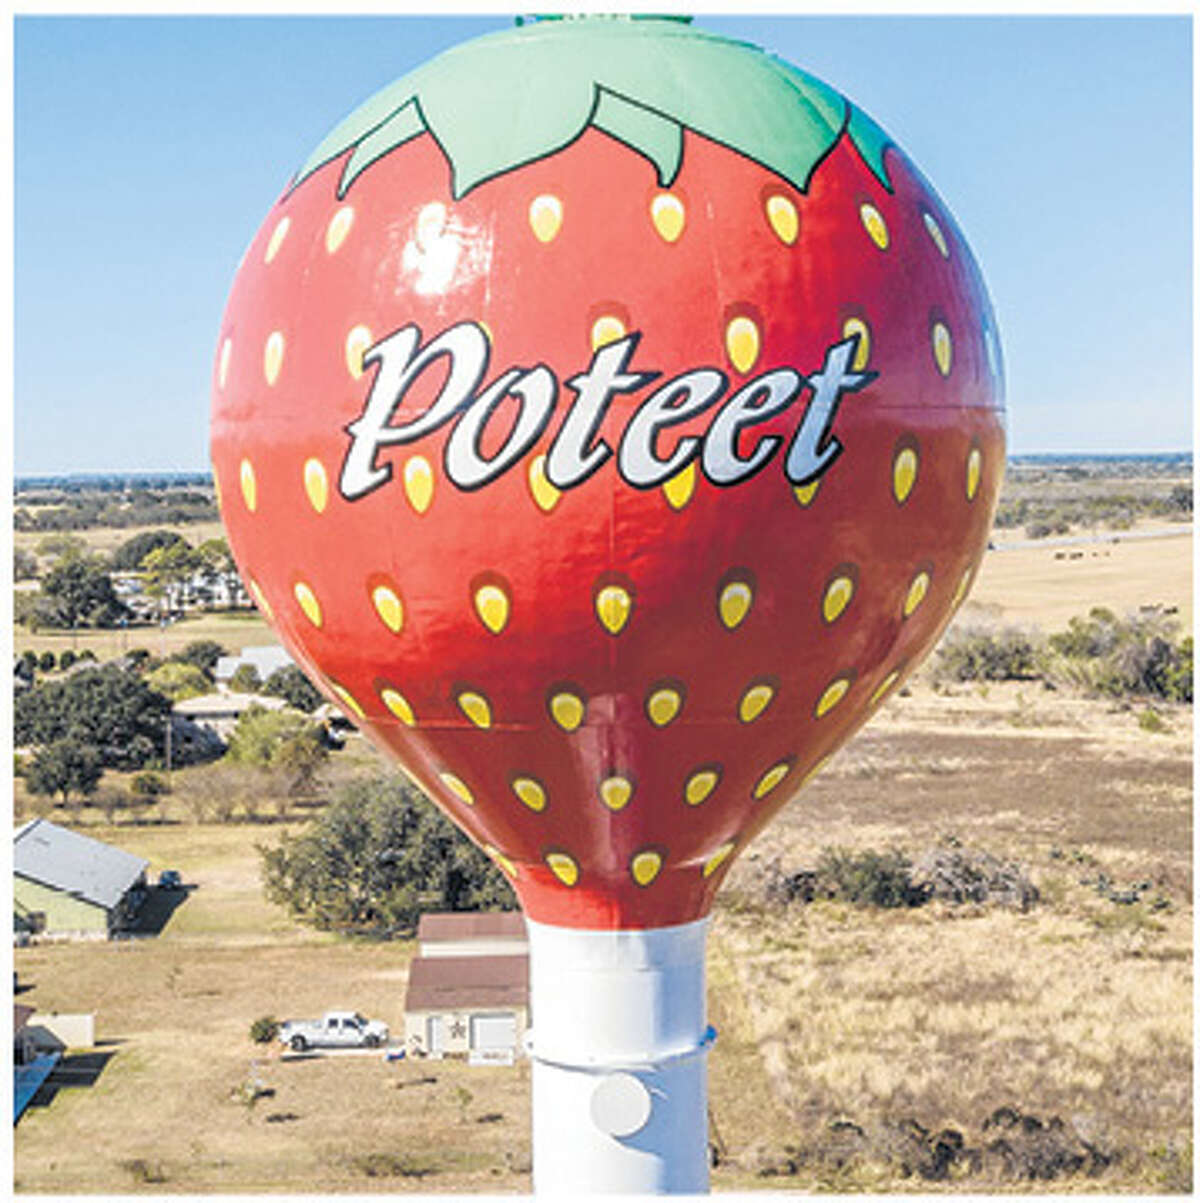 Poteet Smalltown life suits residents of Strawberry Capital of Texas